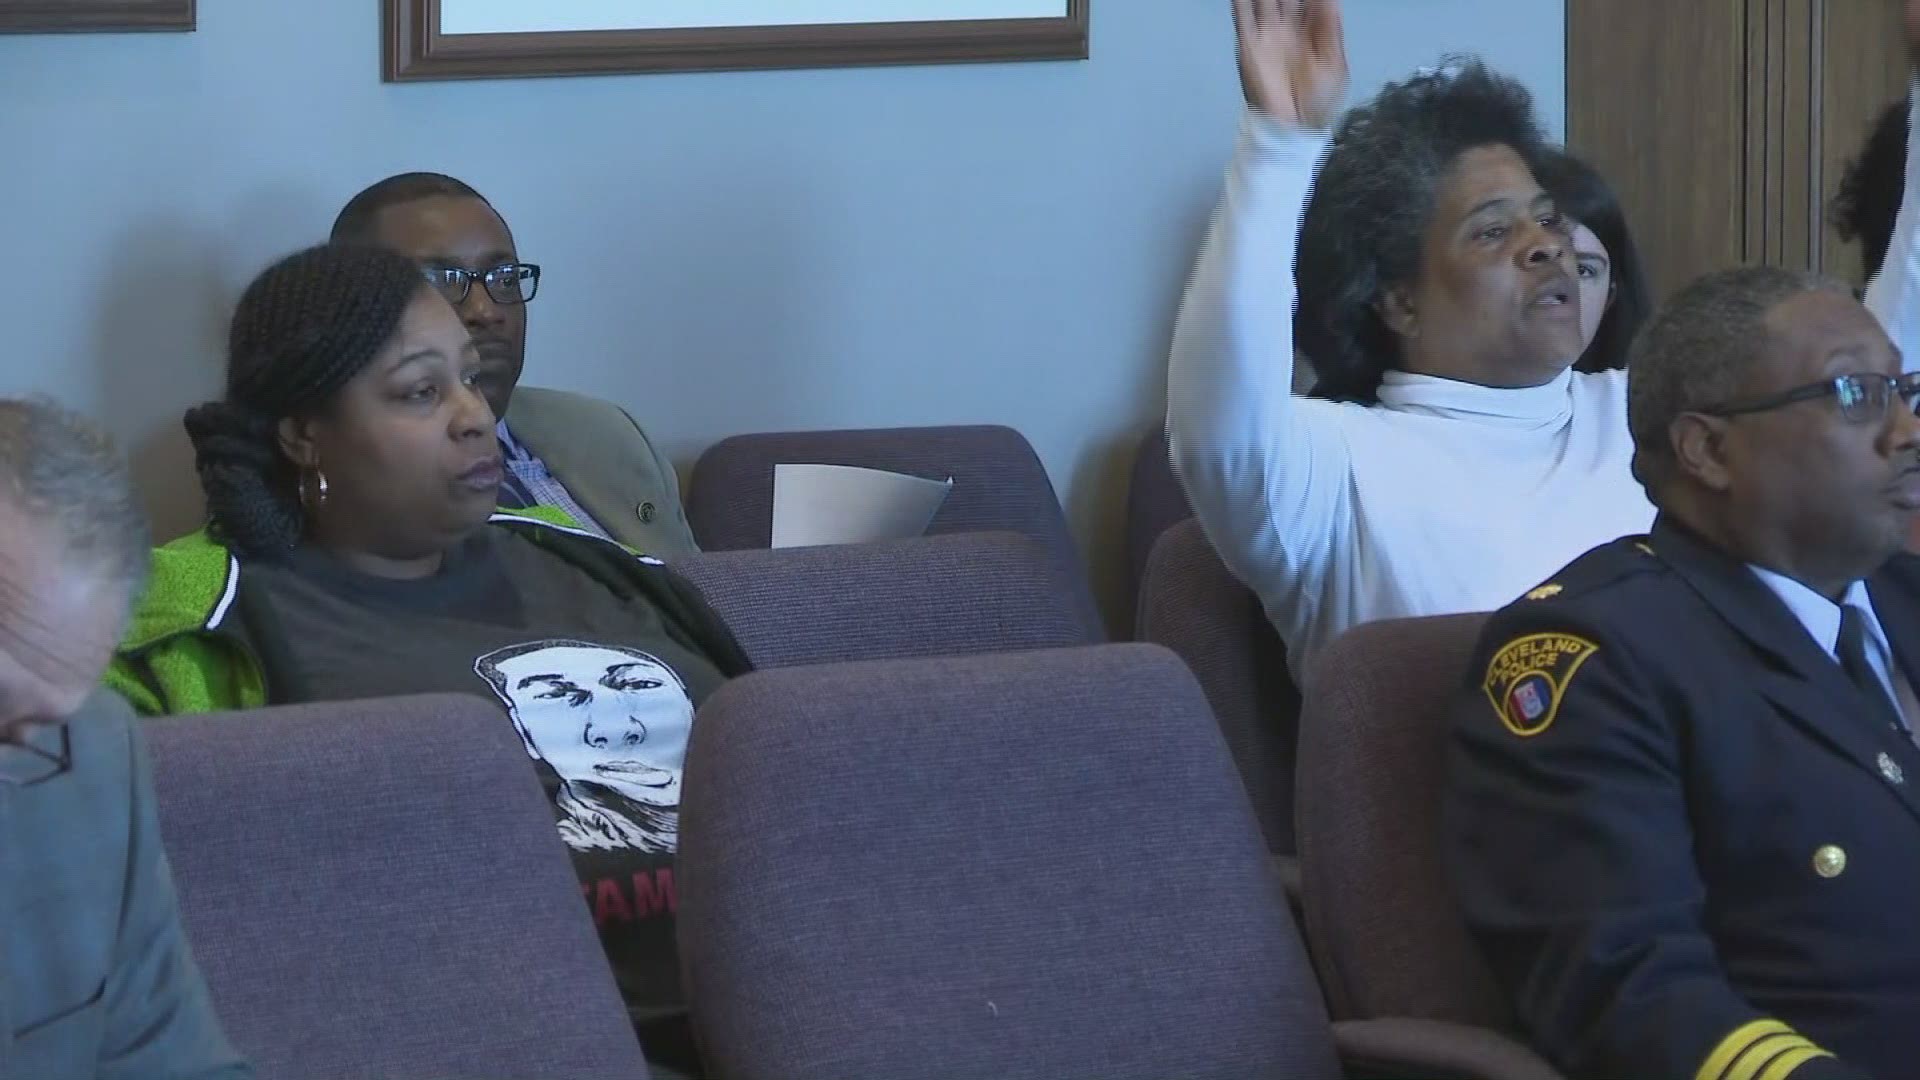 A community activist interrupted the Cuyahoga County Safety Committee meeting April 24, 2019 amid discussion on the consent decree and its status.